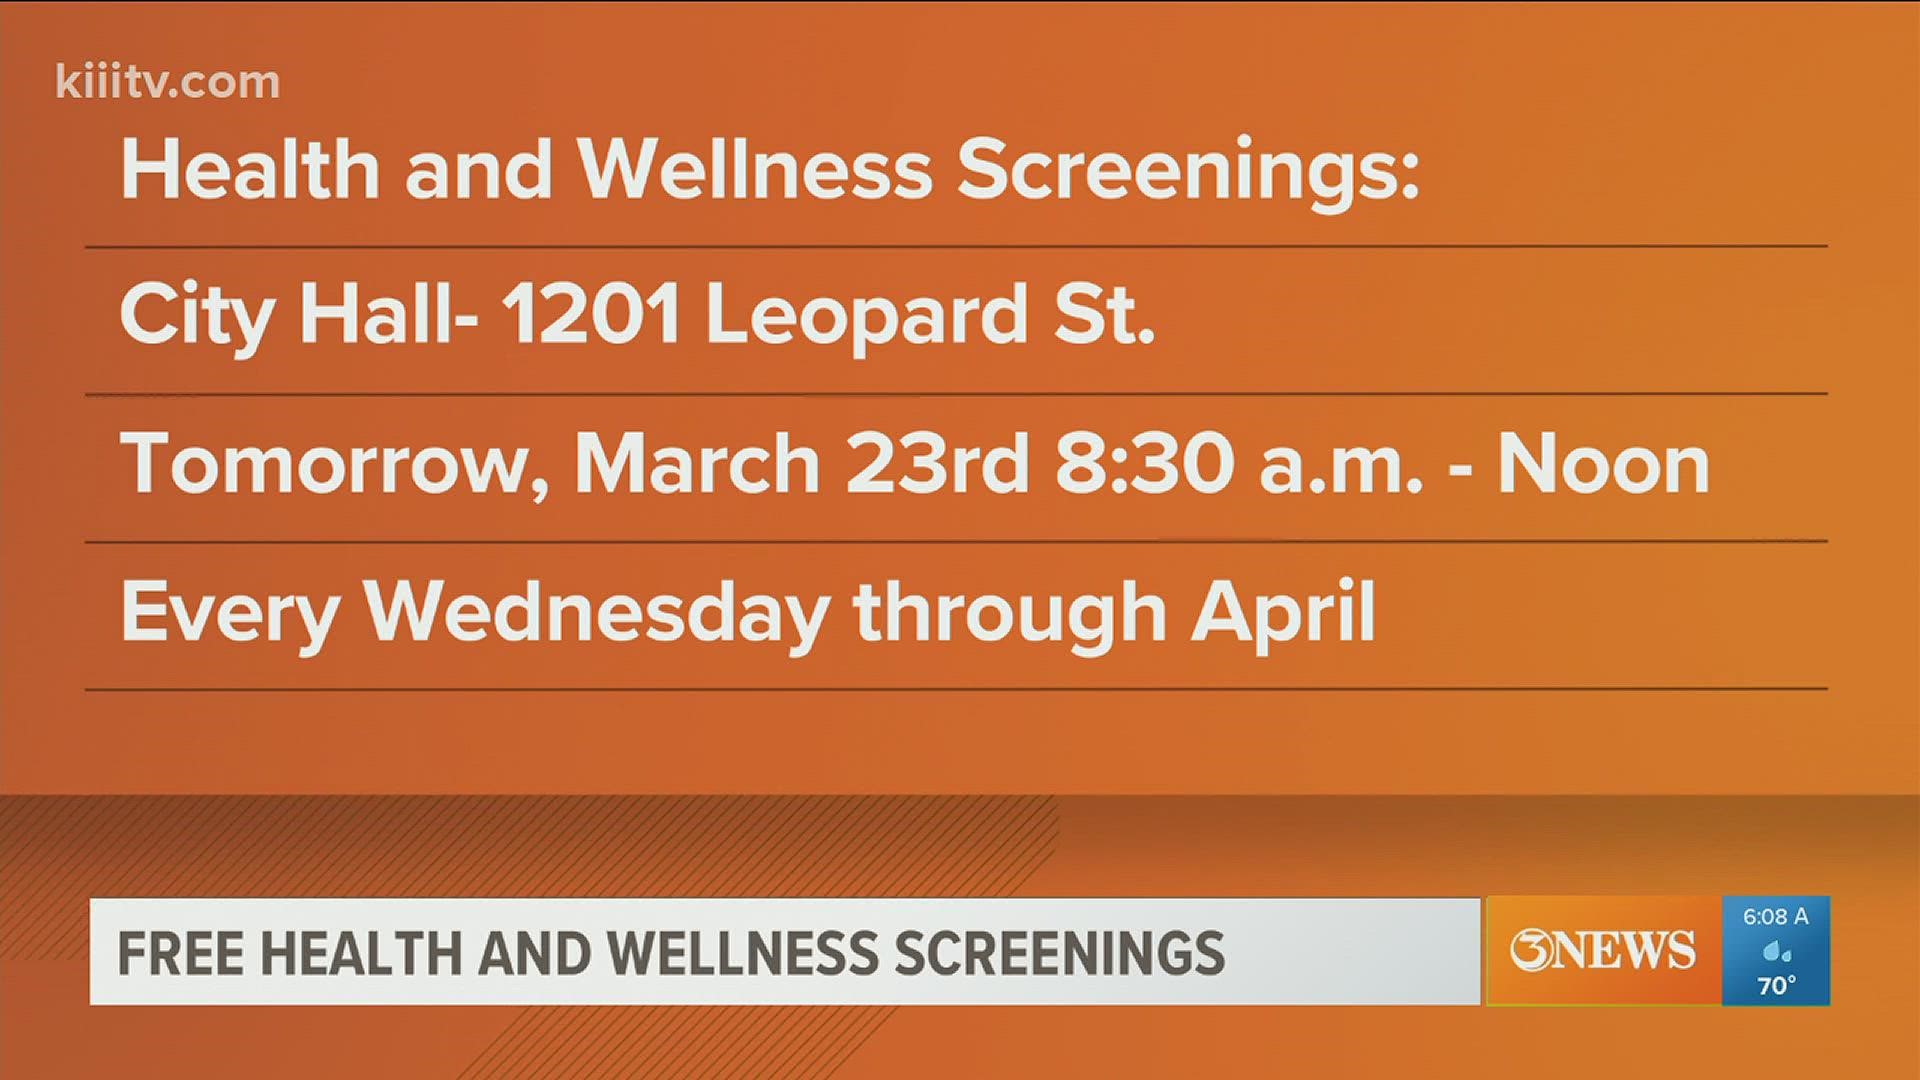 Screenings will be held every Wednesday morning at City Hall.